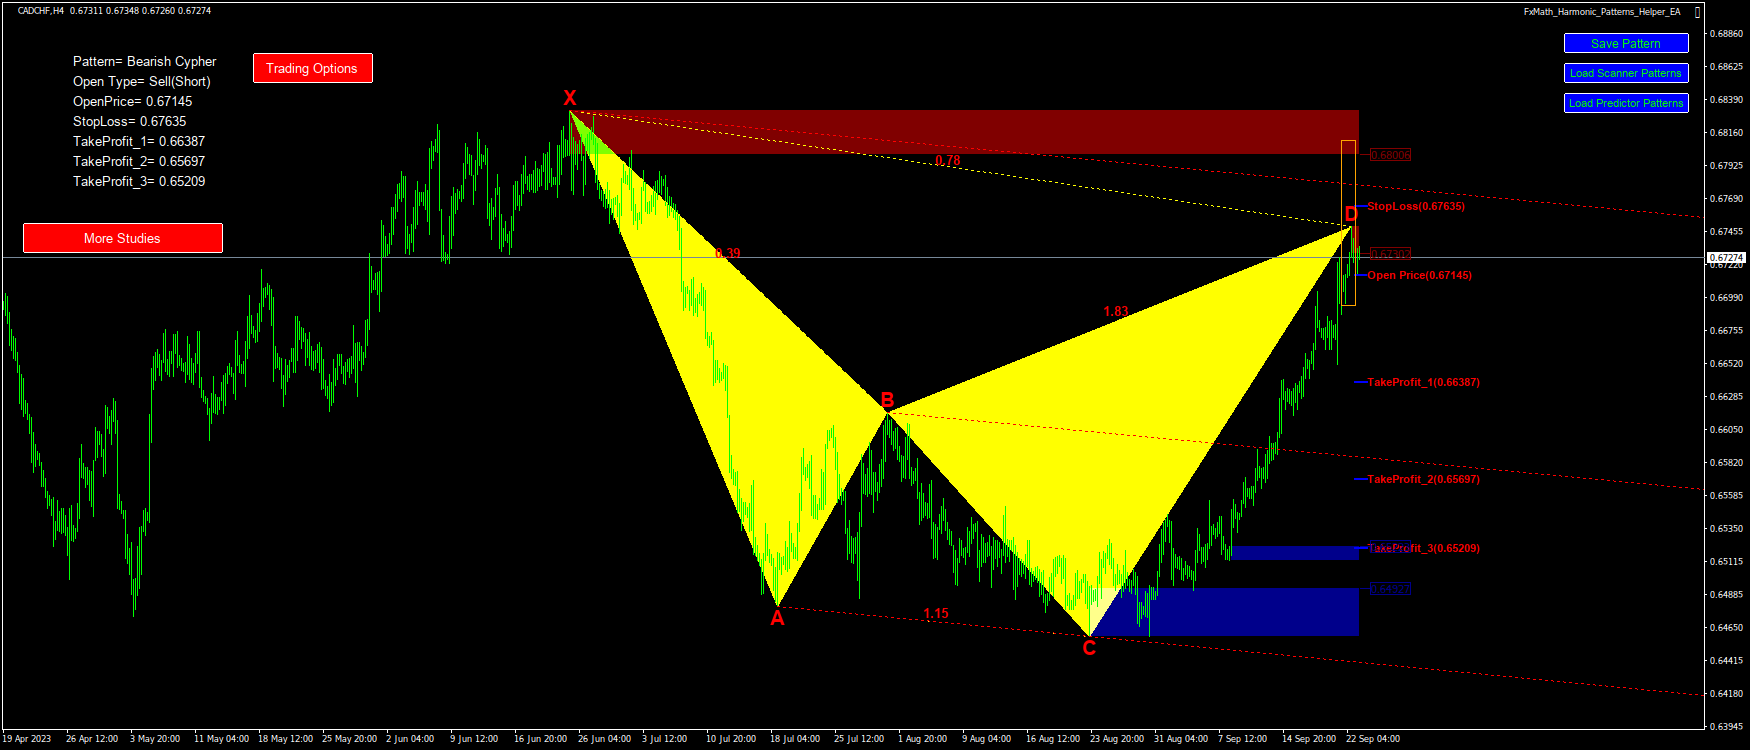 @CADCHF(H4)-Pattern: Cypher : SellStop@: 0.67145, StopLoss: 0.67635, TakeProfit_1: 0.66387, TakeProfit_2: 0.65697, TakeProfit_3: 0.65209-2023.09.25 06:51